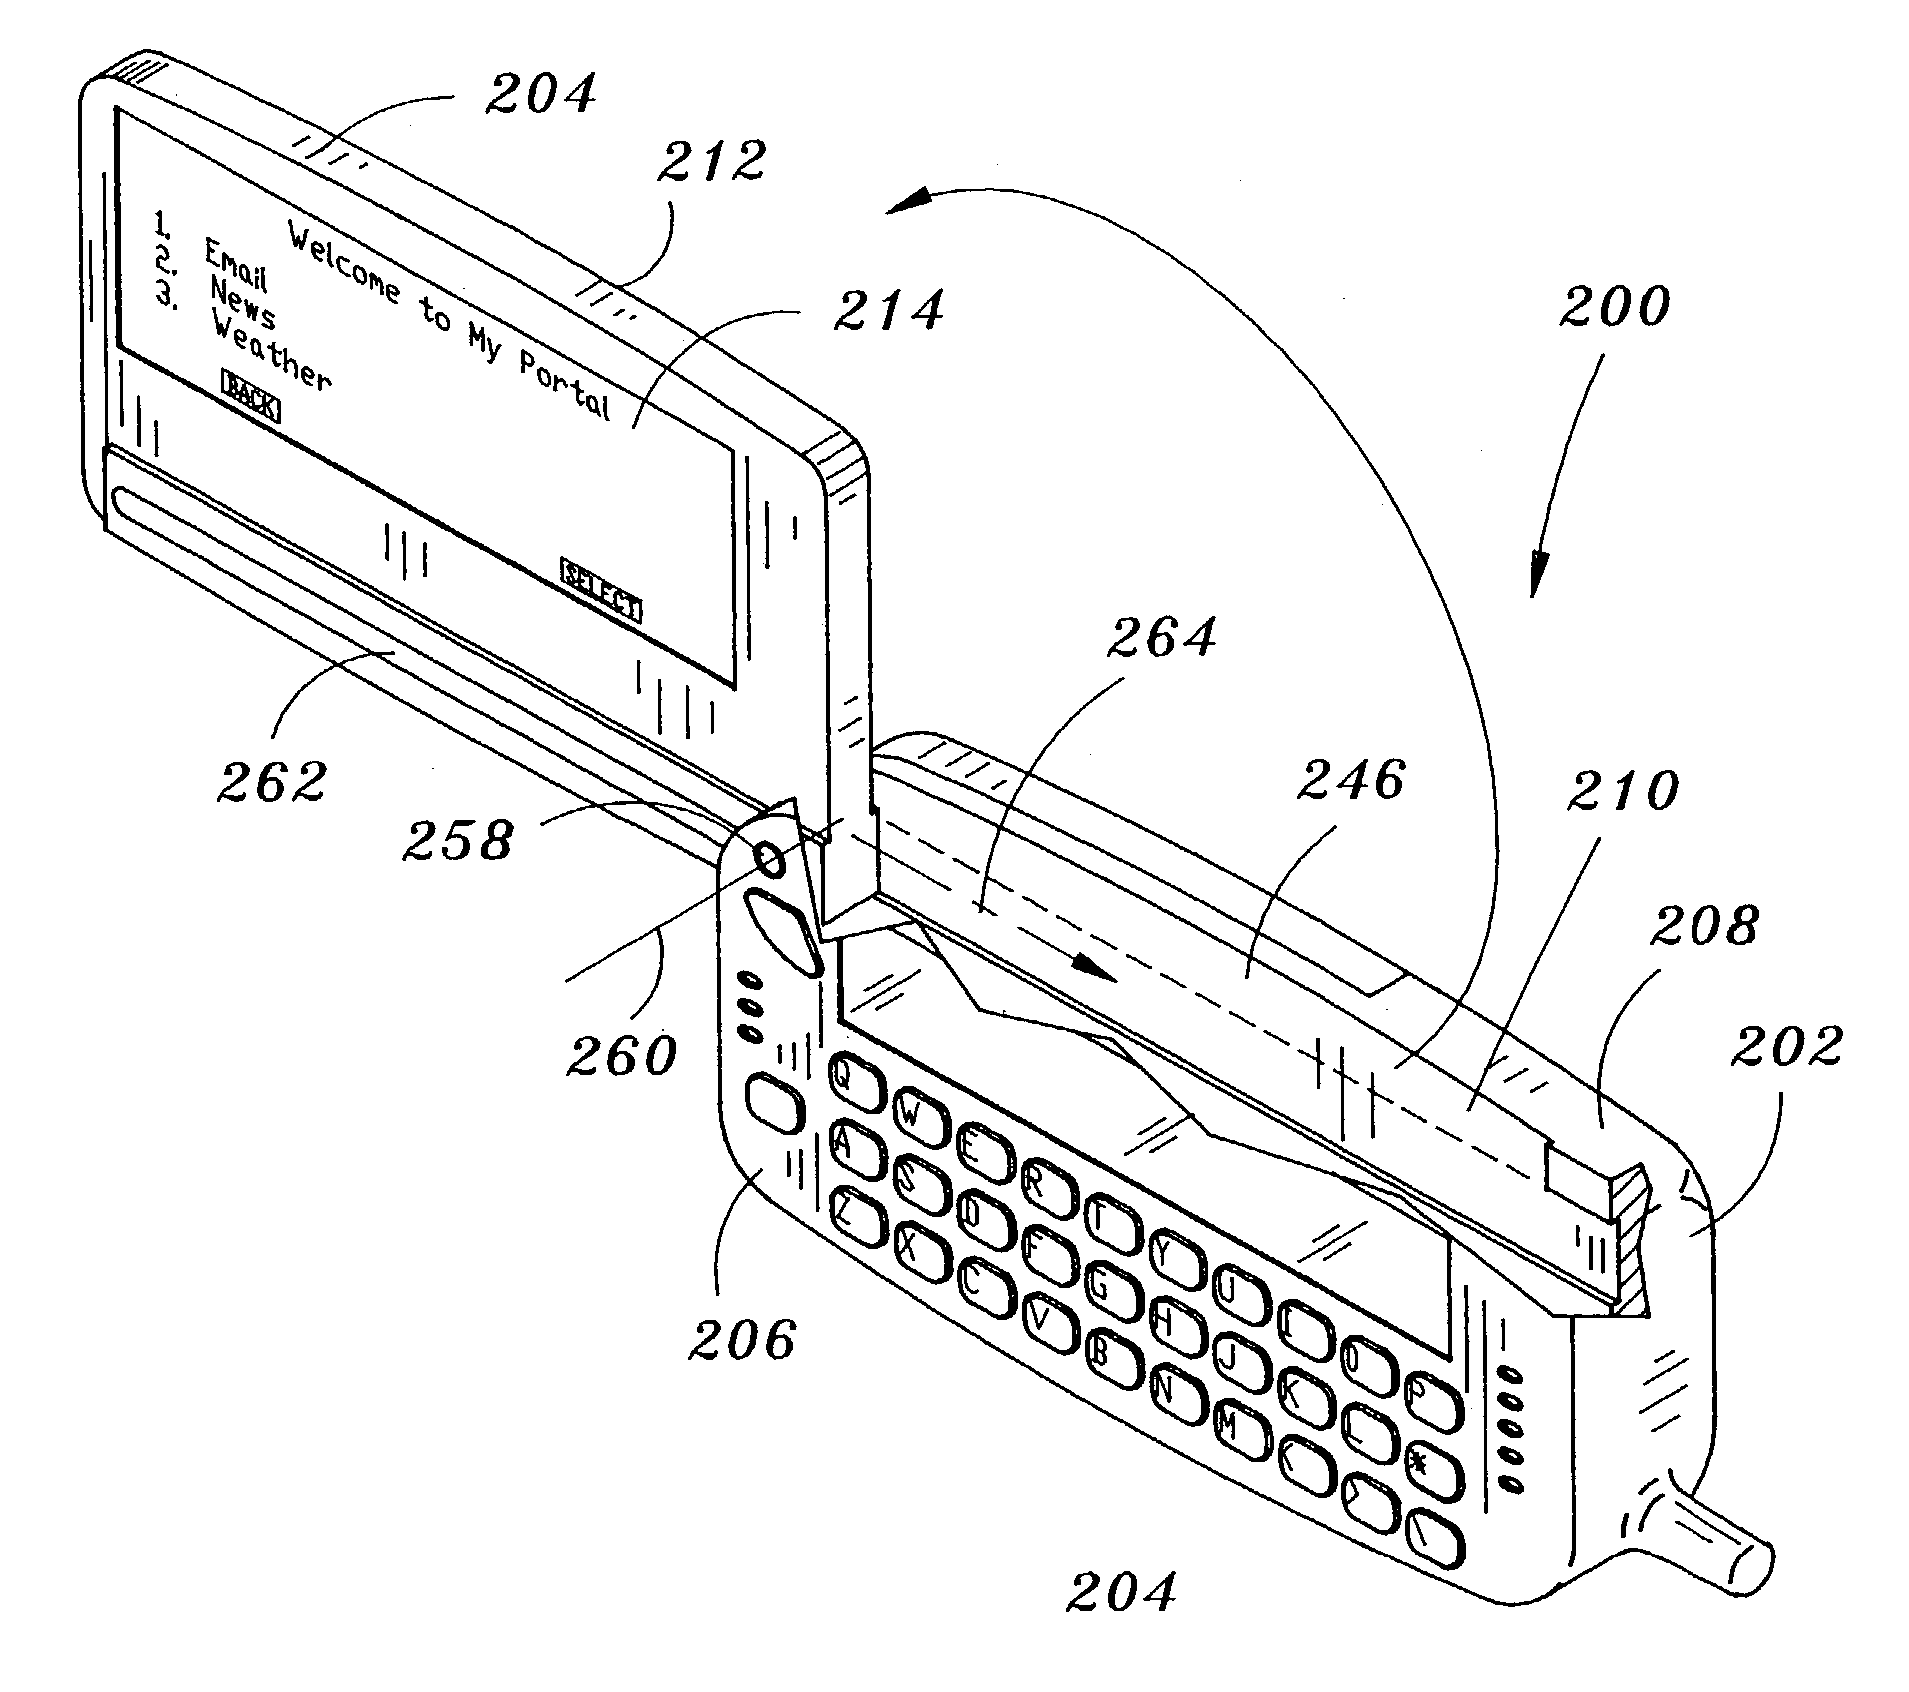 Mobile communication device having extendable display